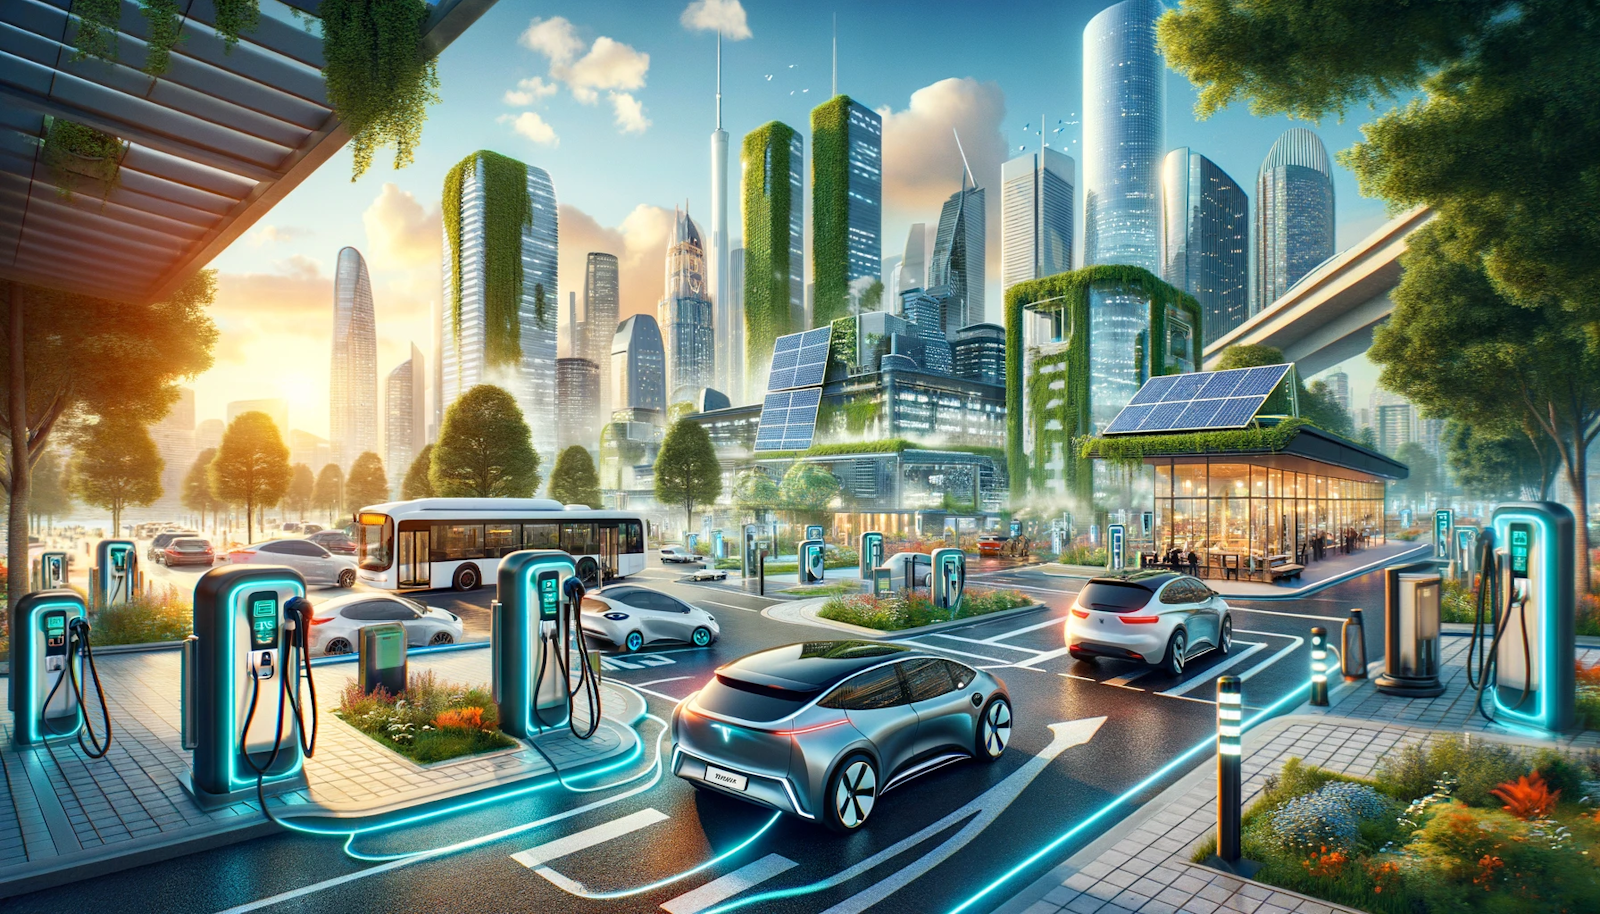 Futuristic cityscape with integrated electric vehicle charging stations among electric cars, buses, and trucks in a sustainable urban environment.